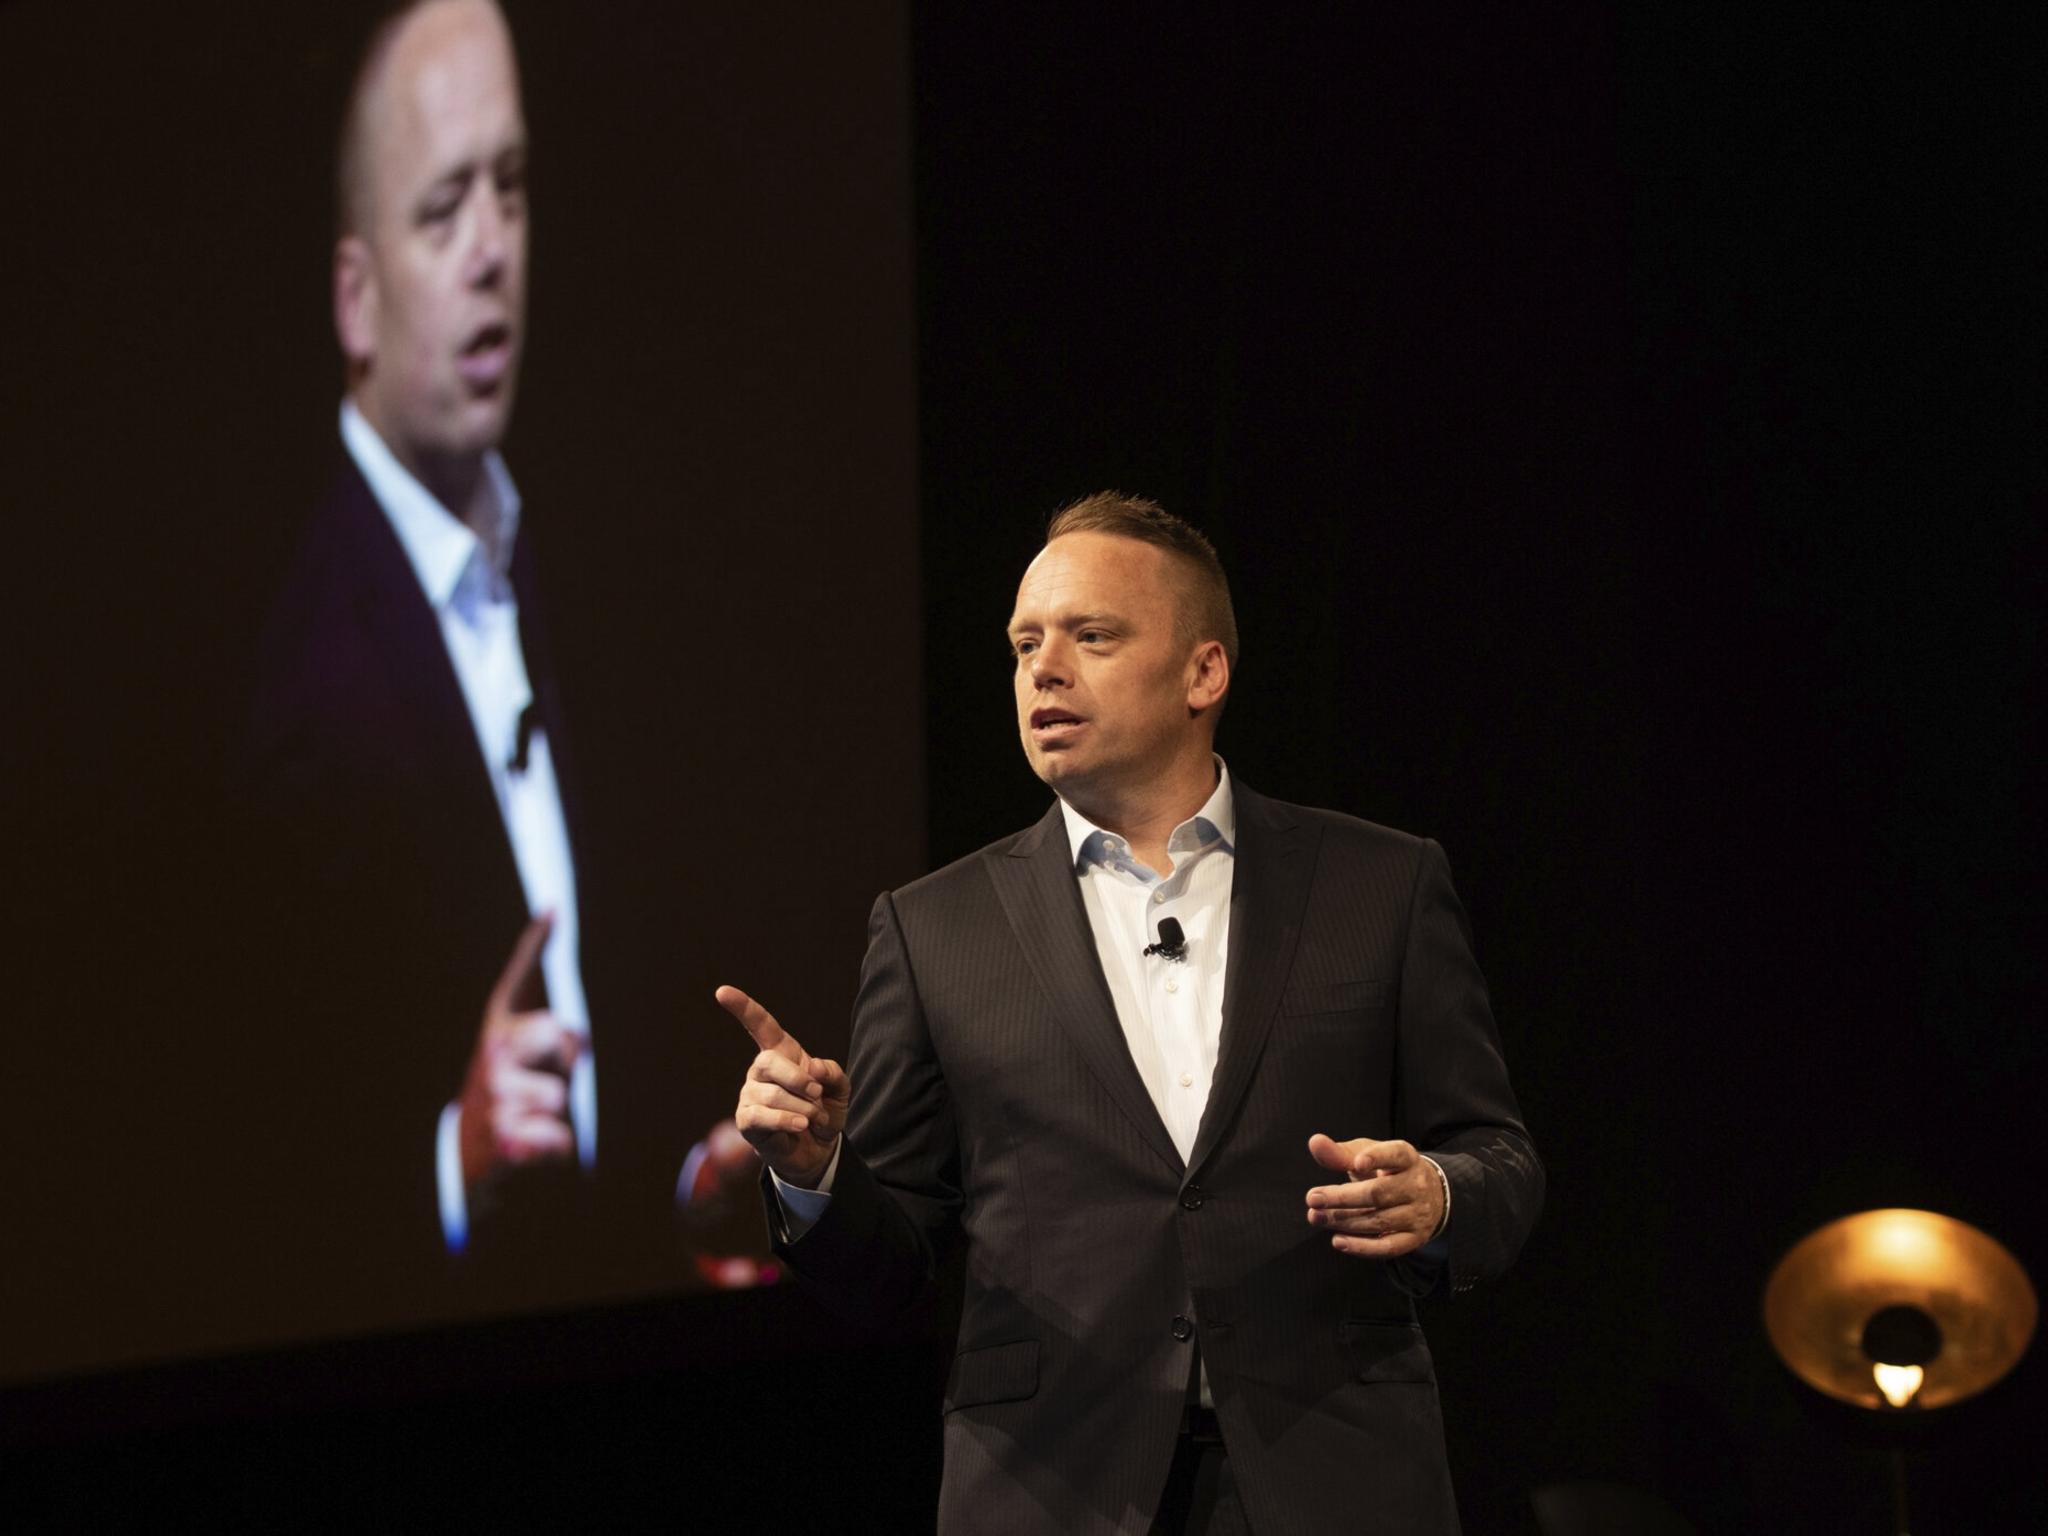 Todd Rose speaks on stage at a conference.